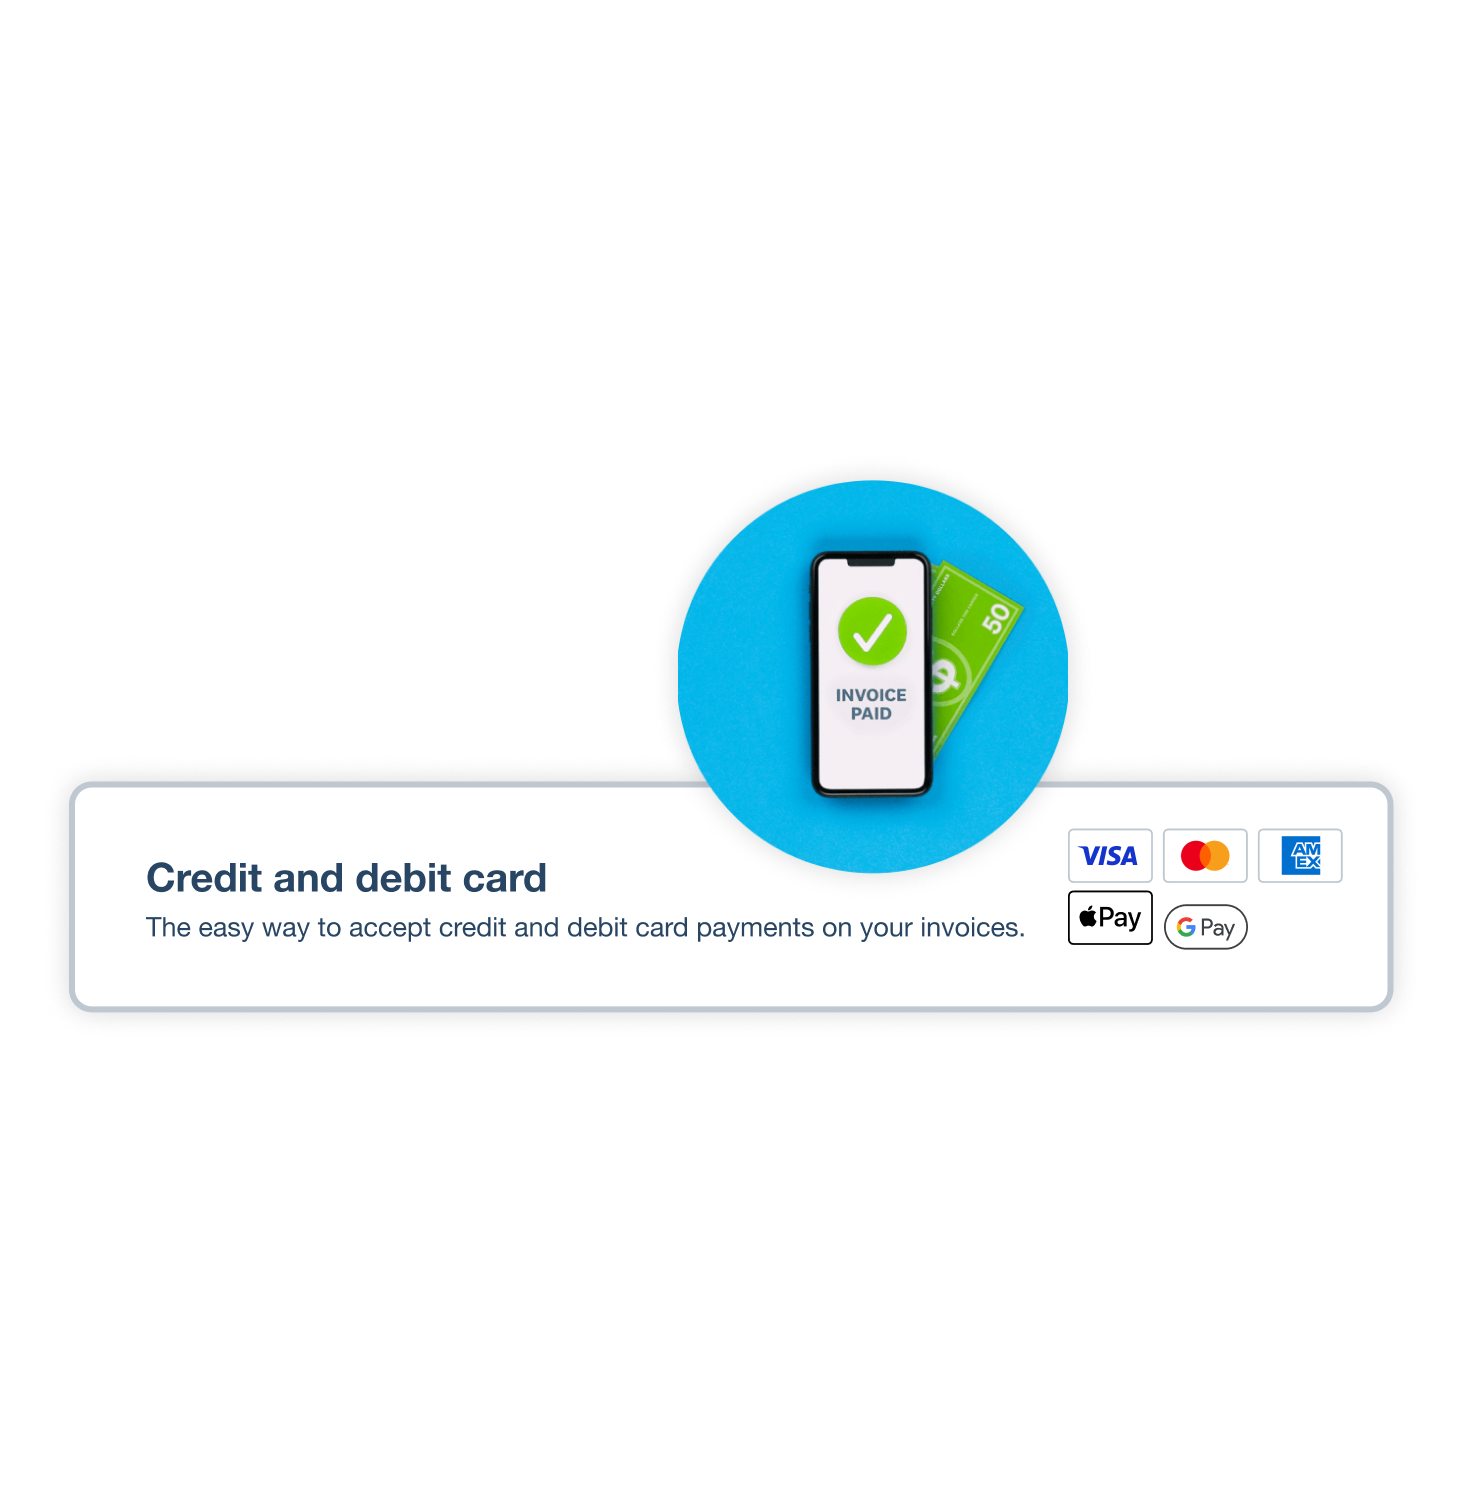 Two options display for paying an online invoice: credit card or debit card, or direct debit.